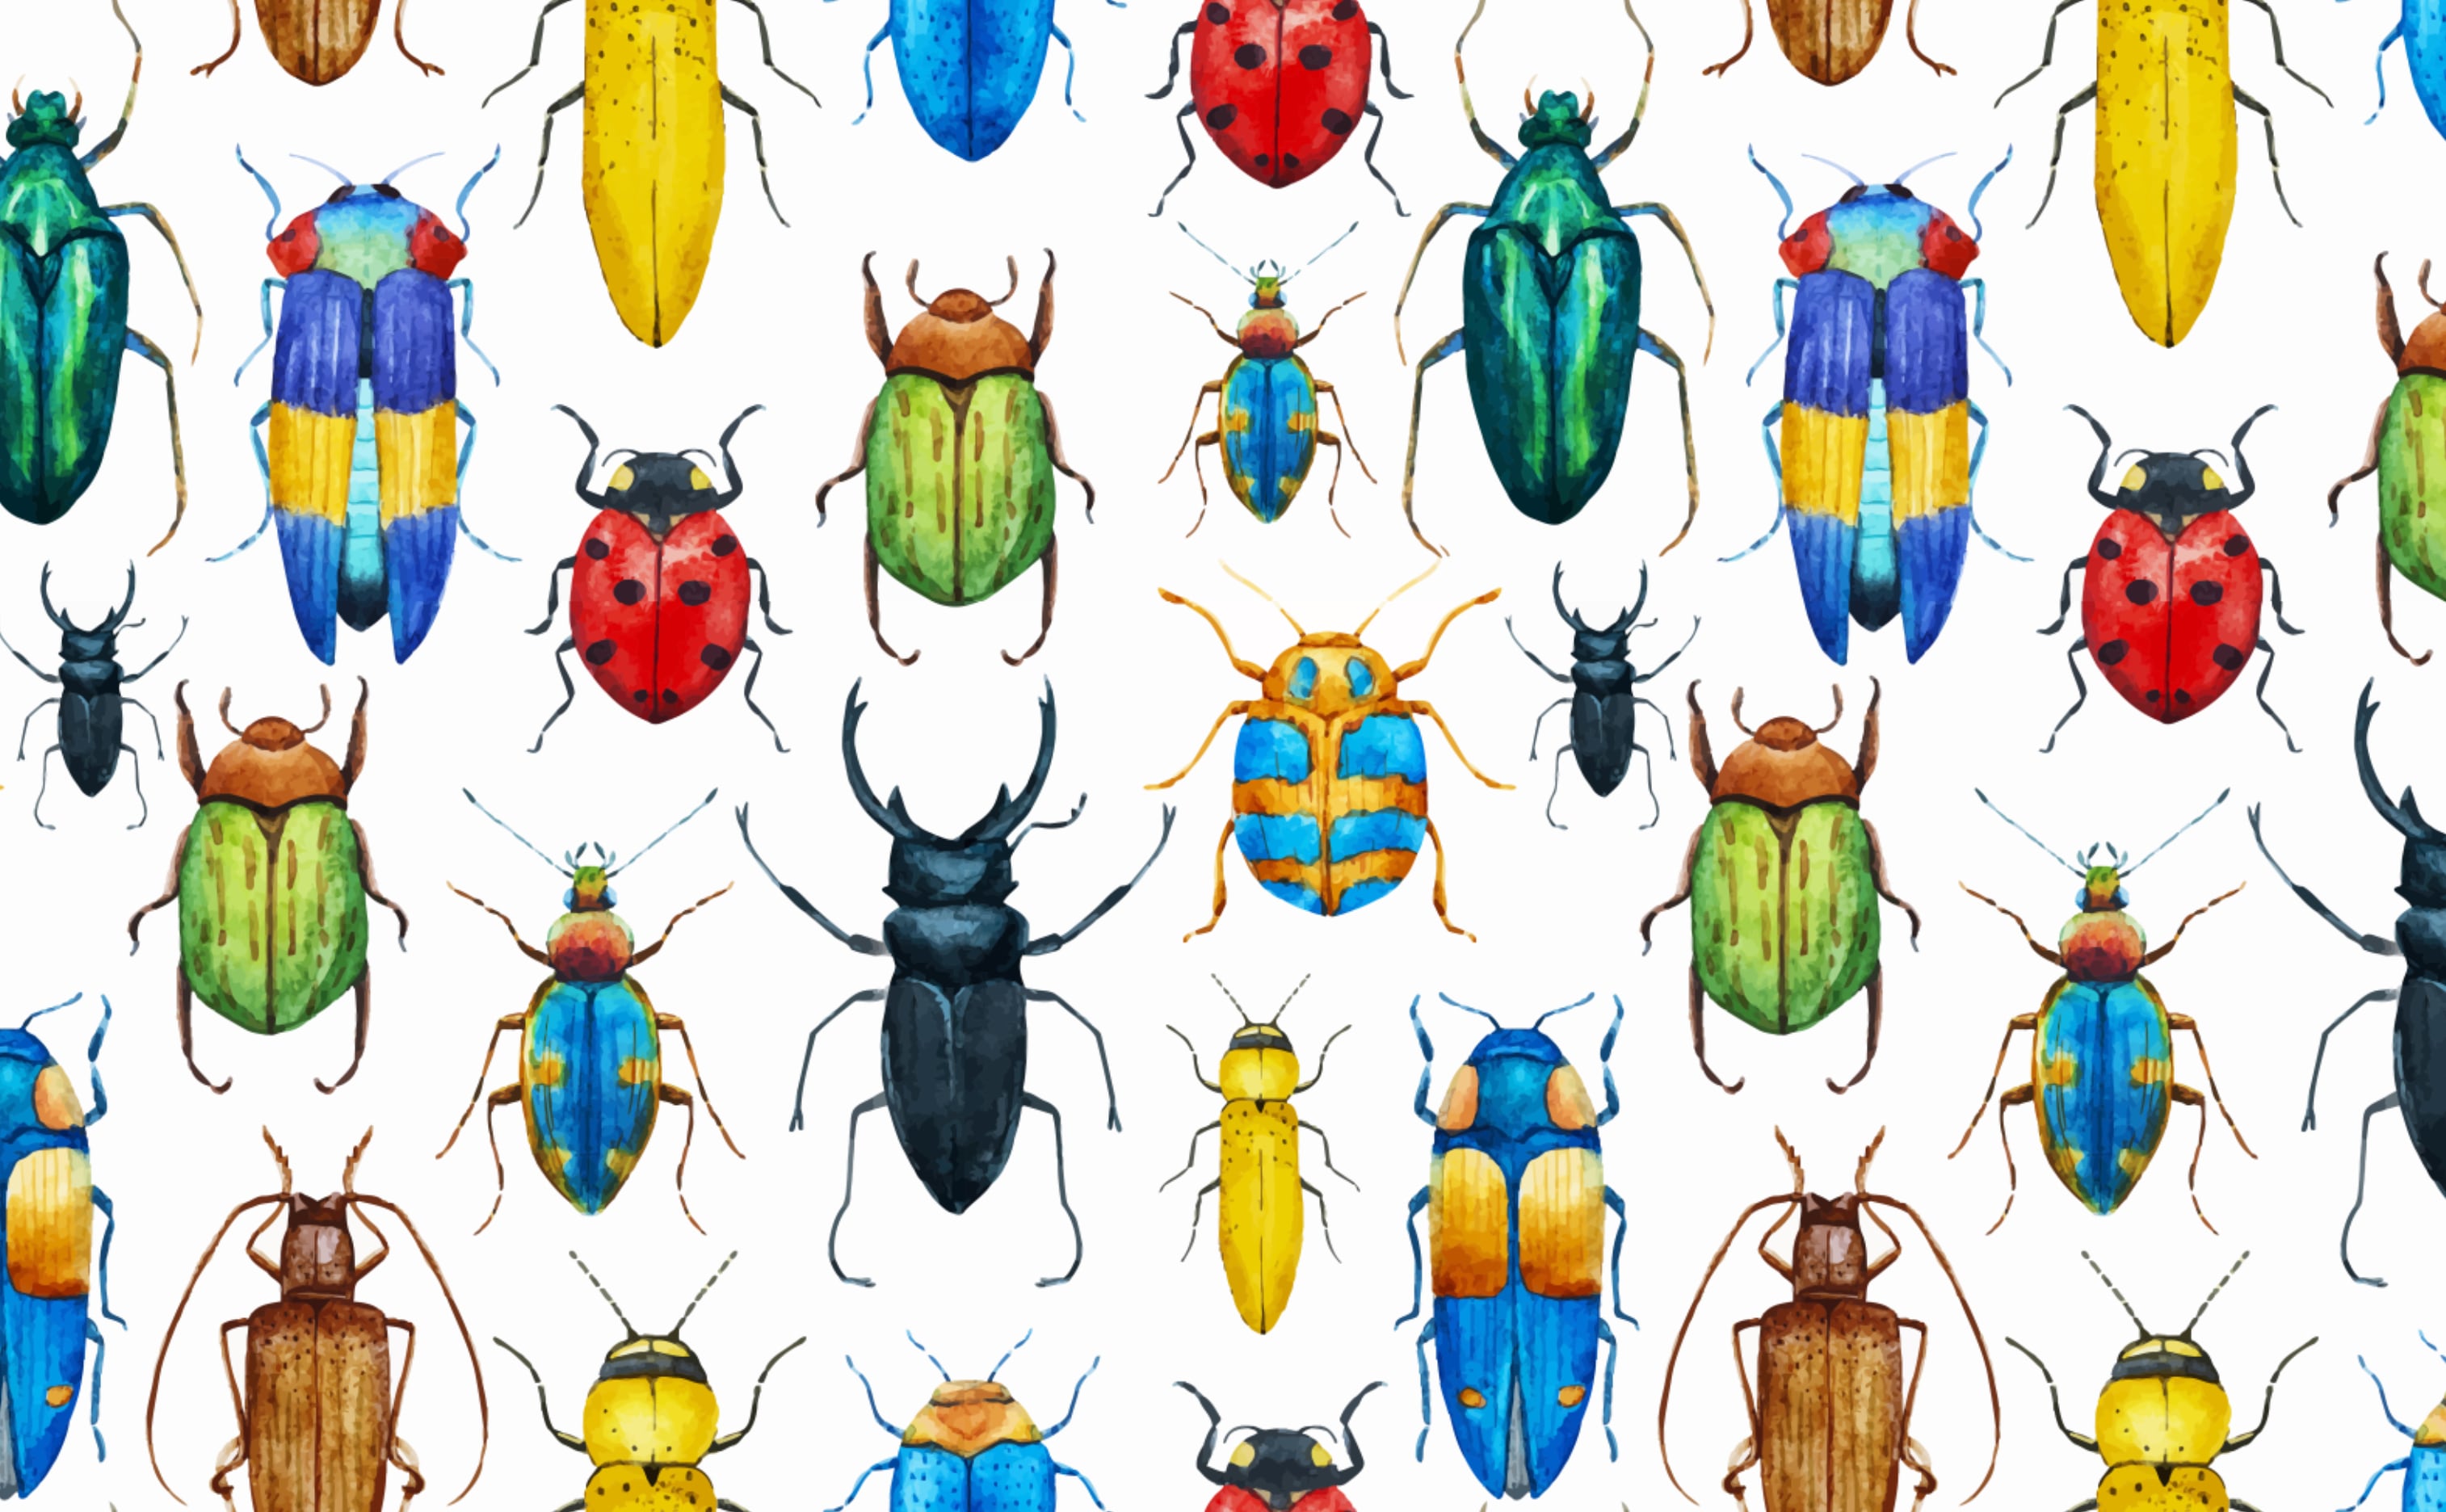 The Bug Wallpapers